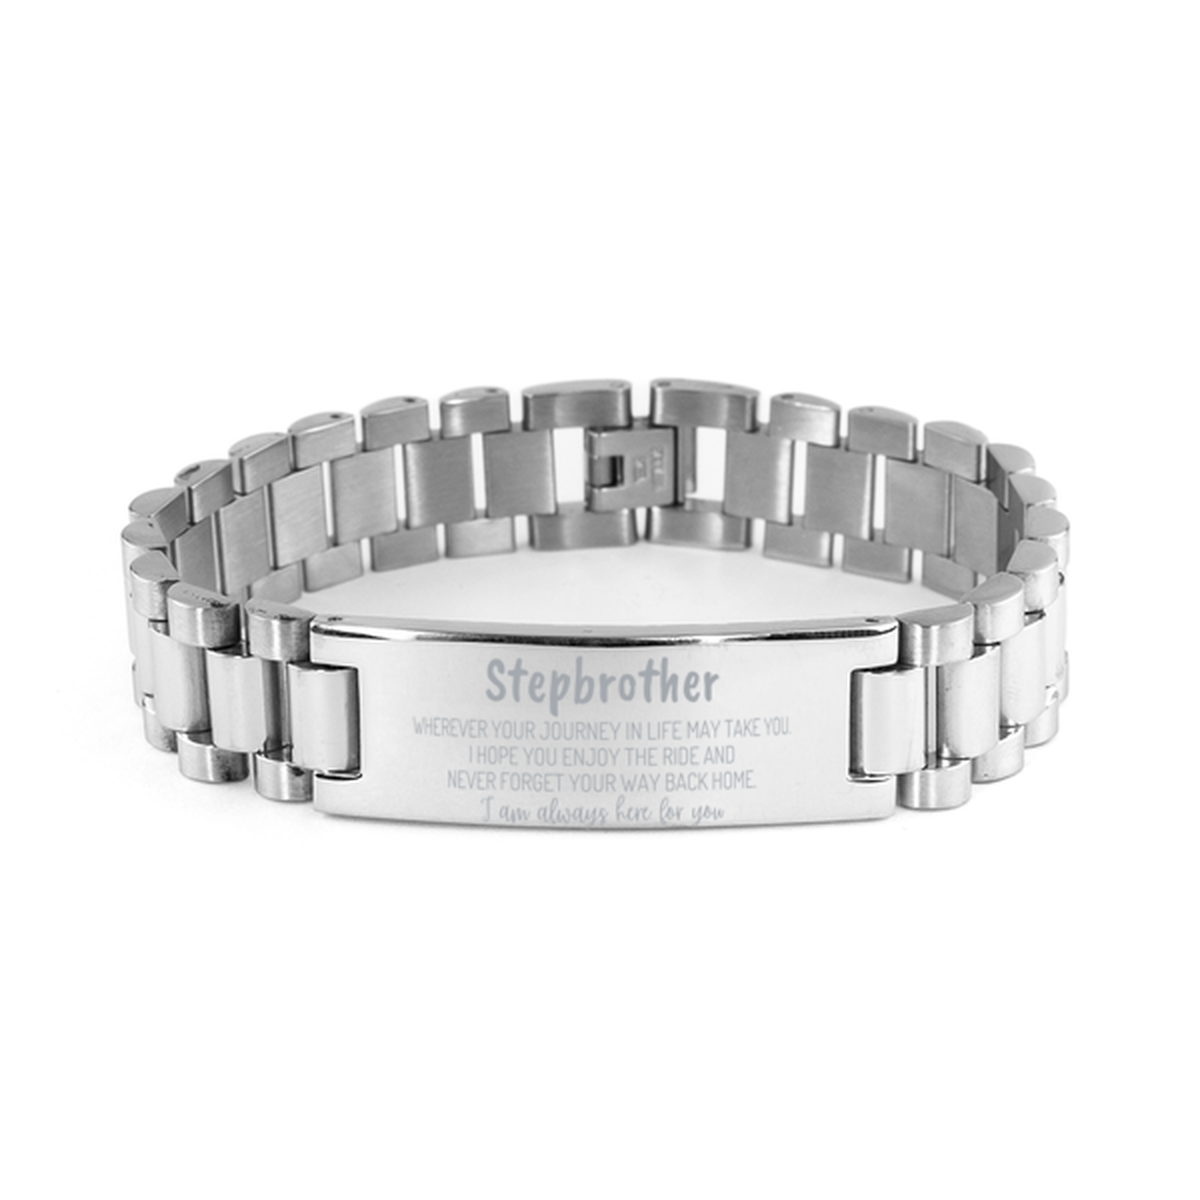 Stepbrother wherever your journey in life may take you, I am always here for you Stepbrother Ladder Stainless Steel Bracelet, Awesome Christmas Gifts For Stepbrother, Stepbrother Birthday Gifts for Men Women Family Loved One